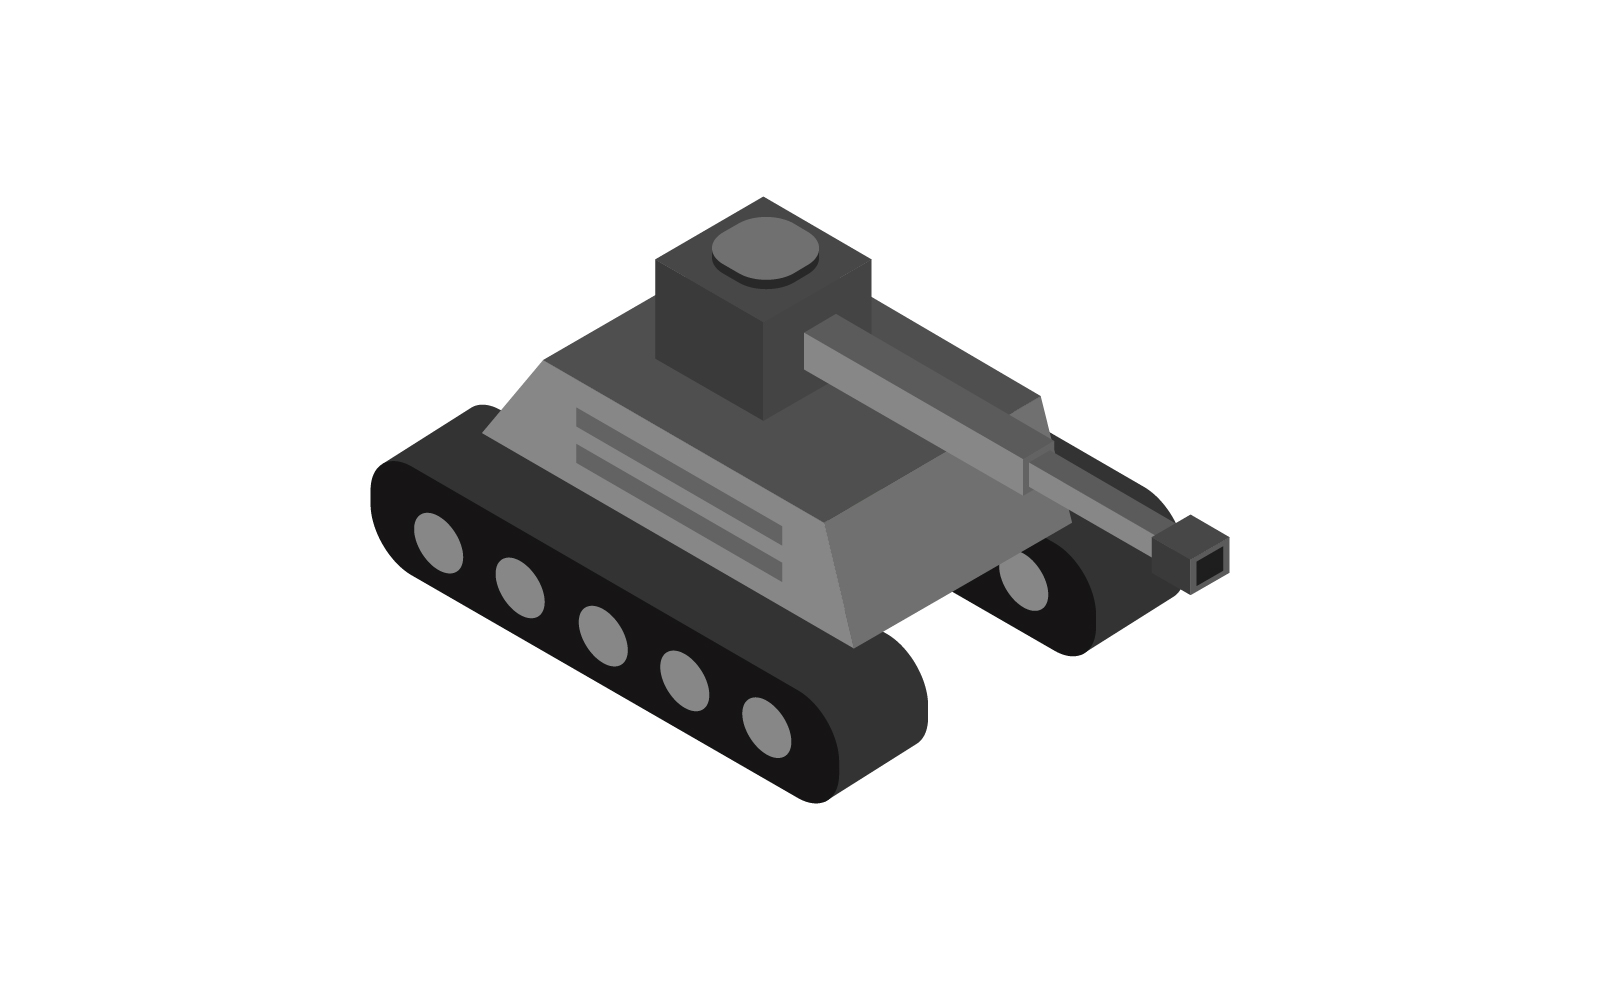 Isometric tank illustrated on a white background